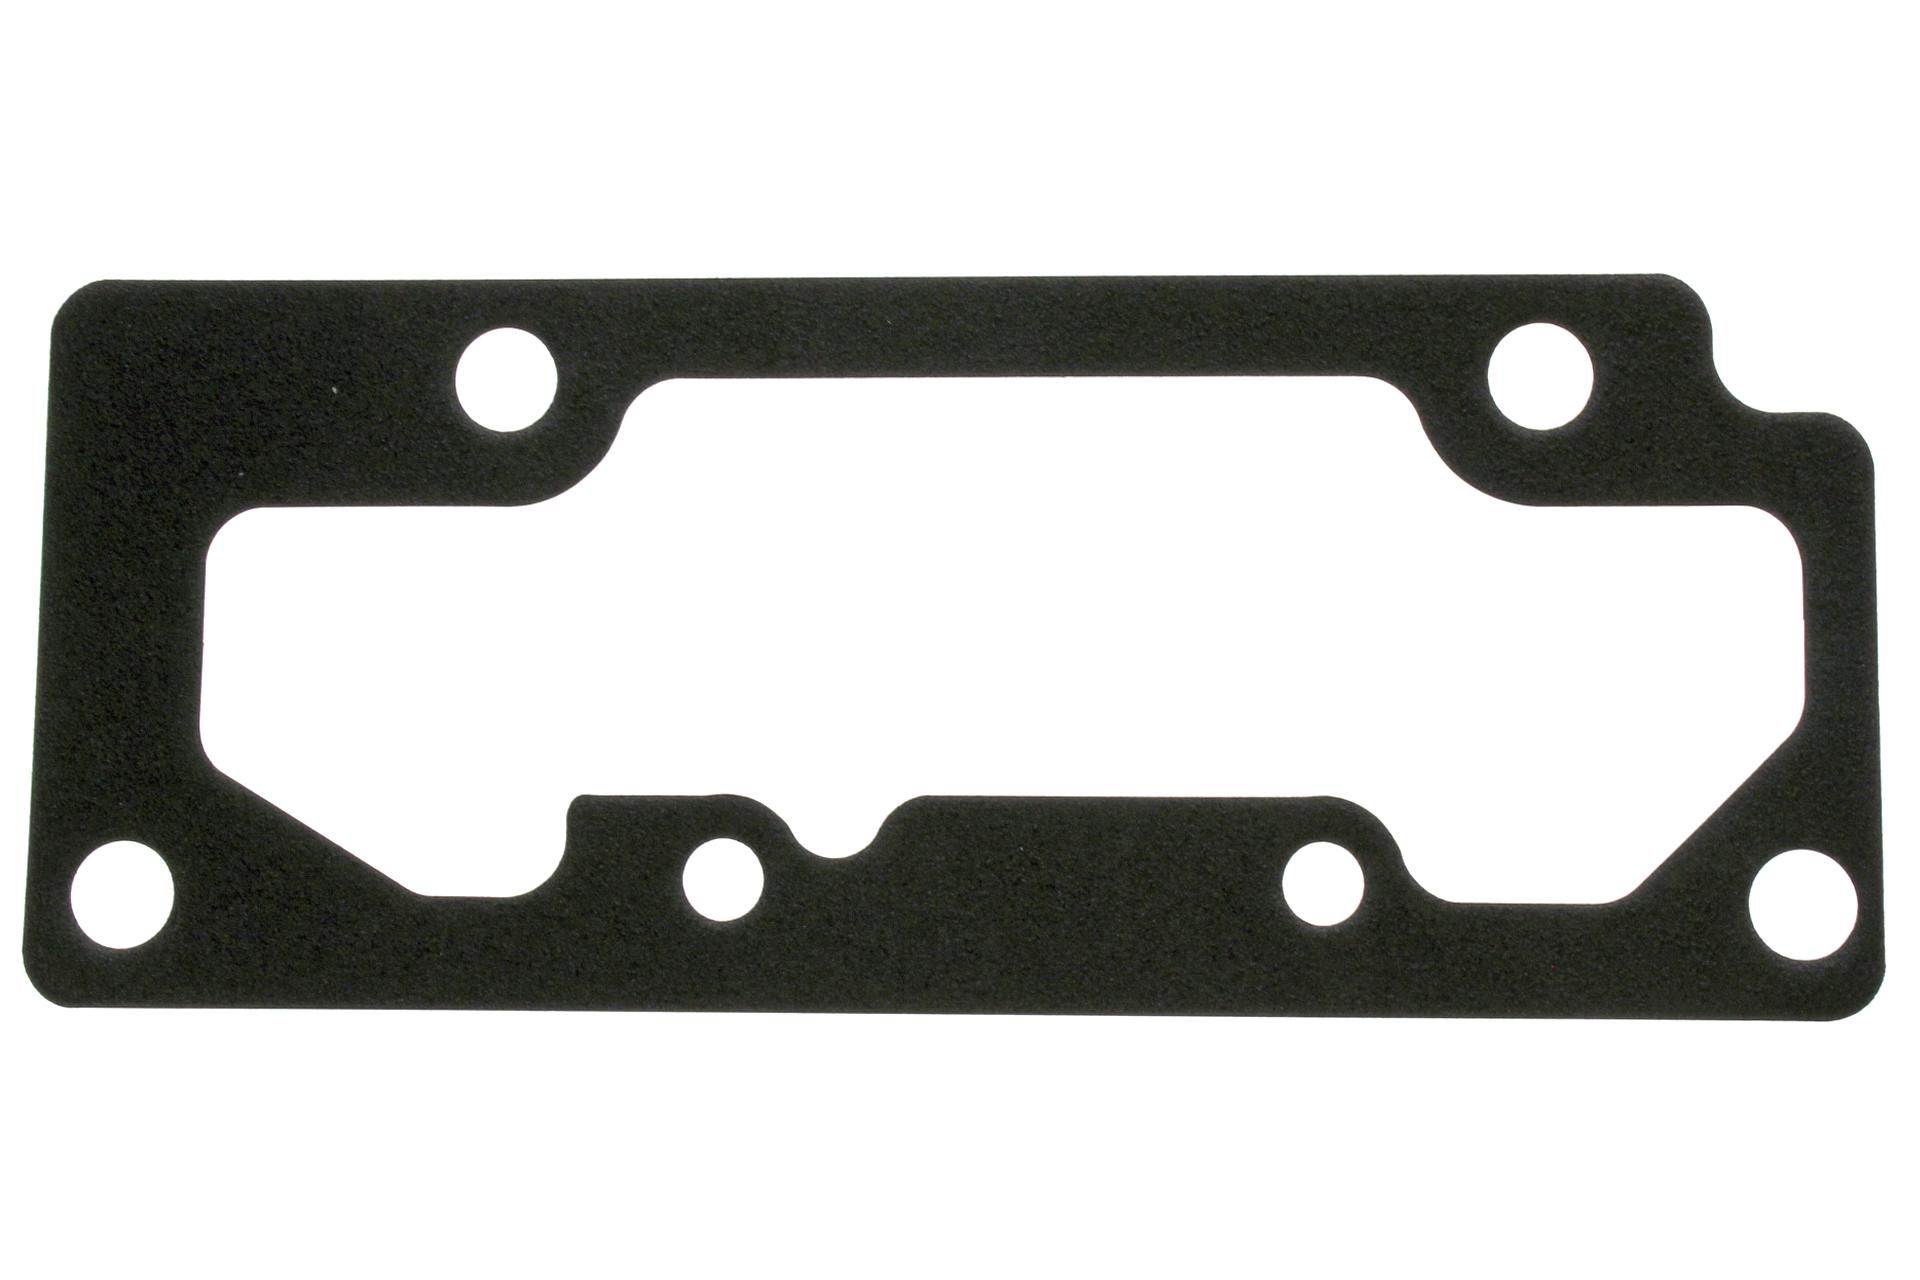 6BH-1131B-00-00 COVER GASKET